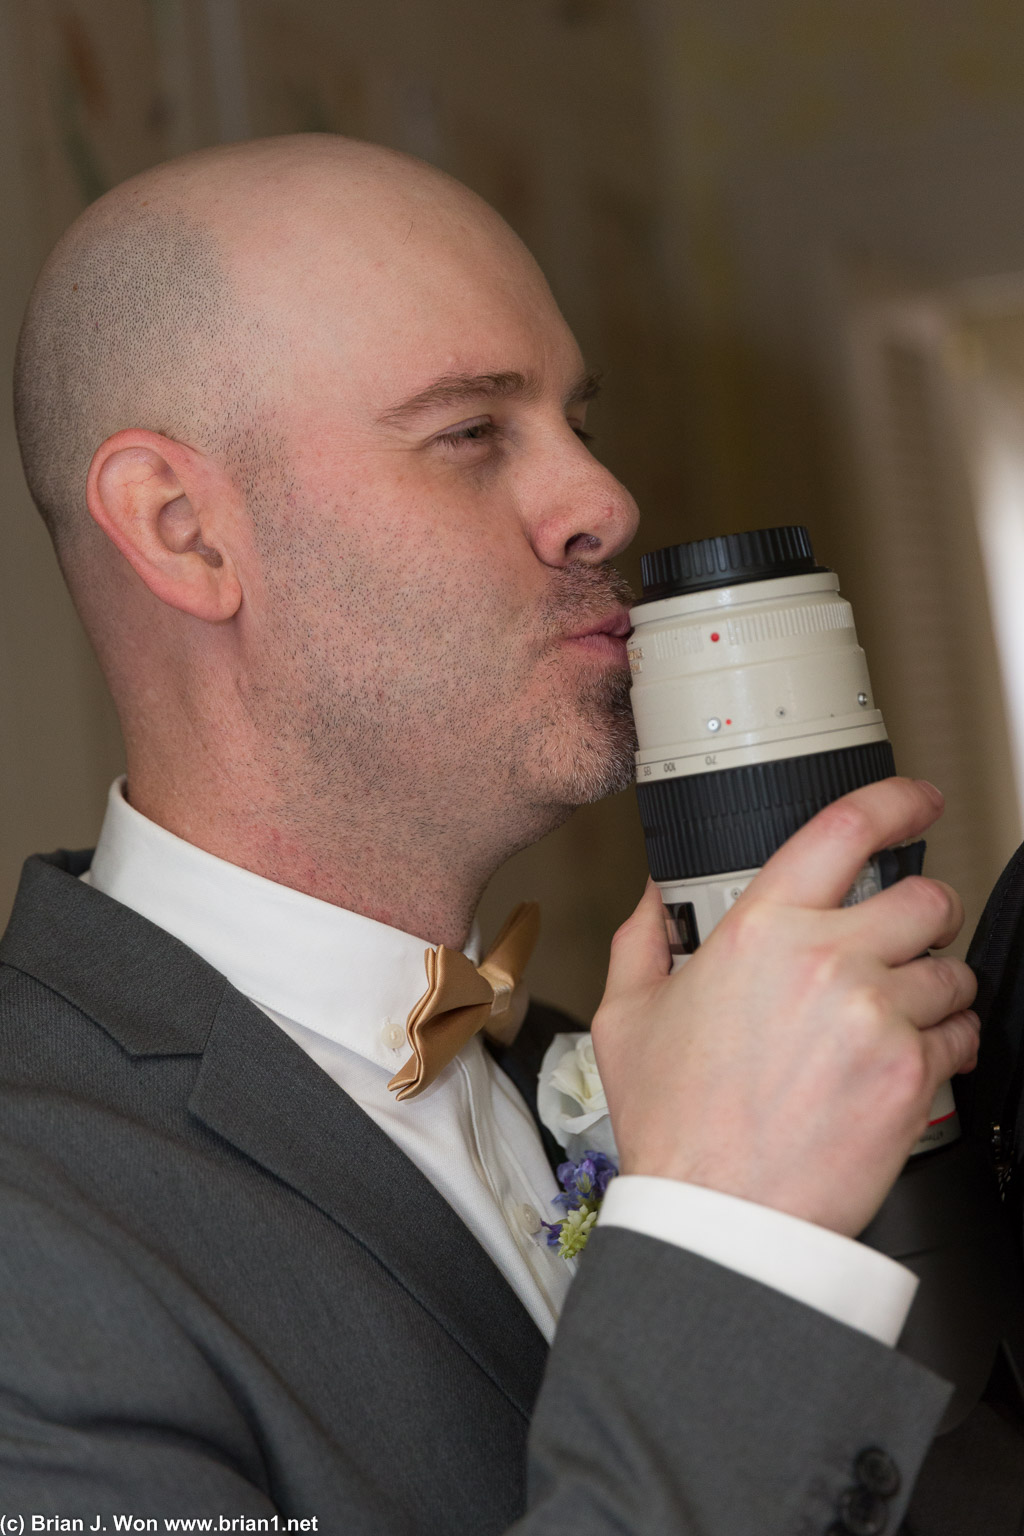 Is he marrying his Canon 70-200?